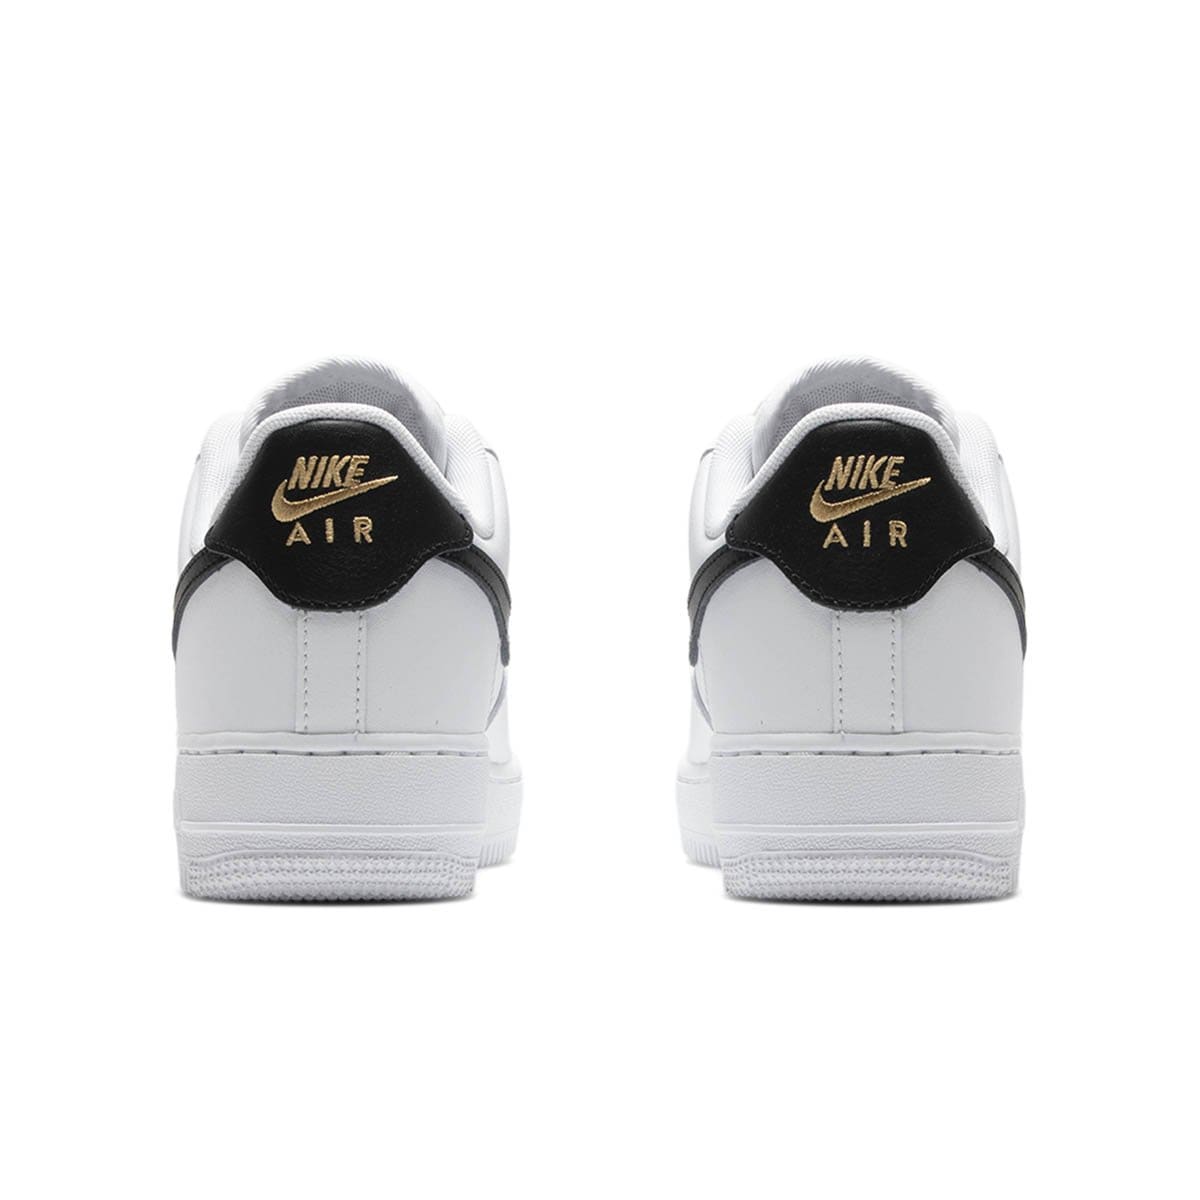 Nike Casual WOMEN'S AIR FORCE 1 07 ESSENTIAL